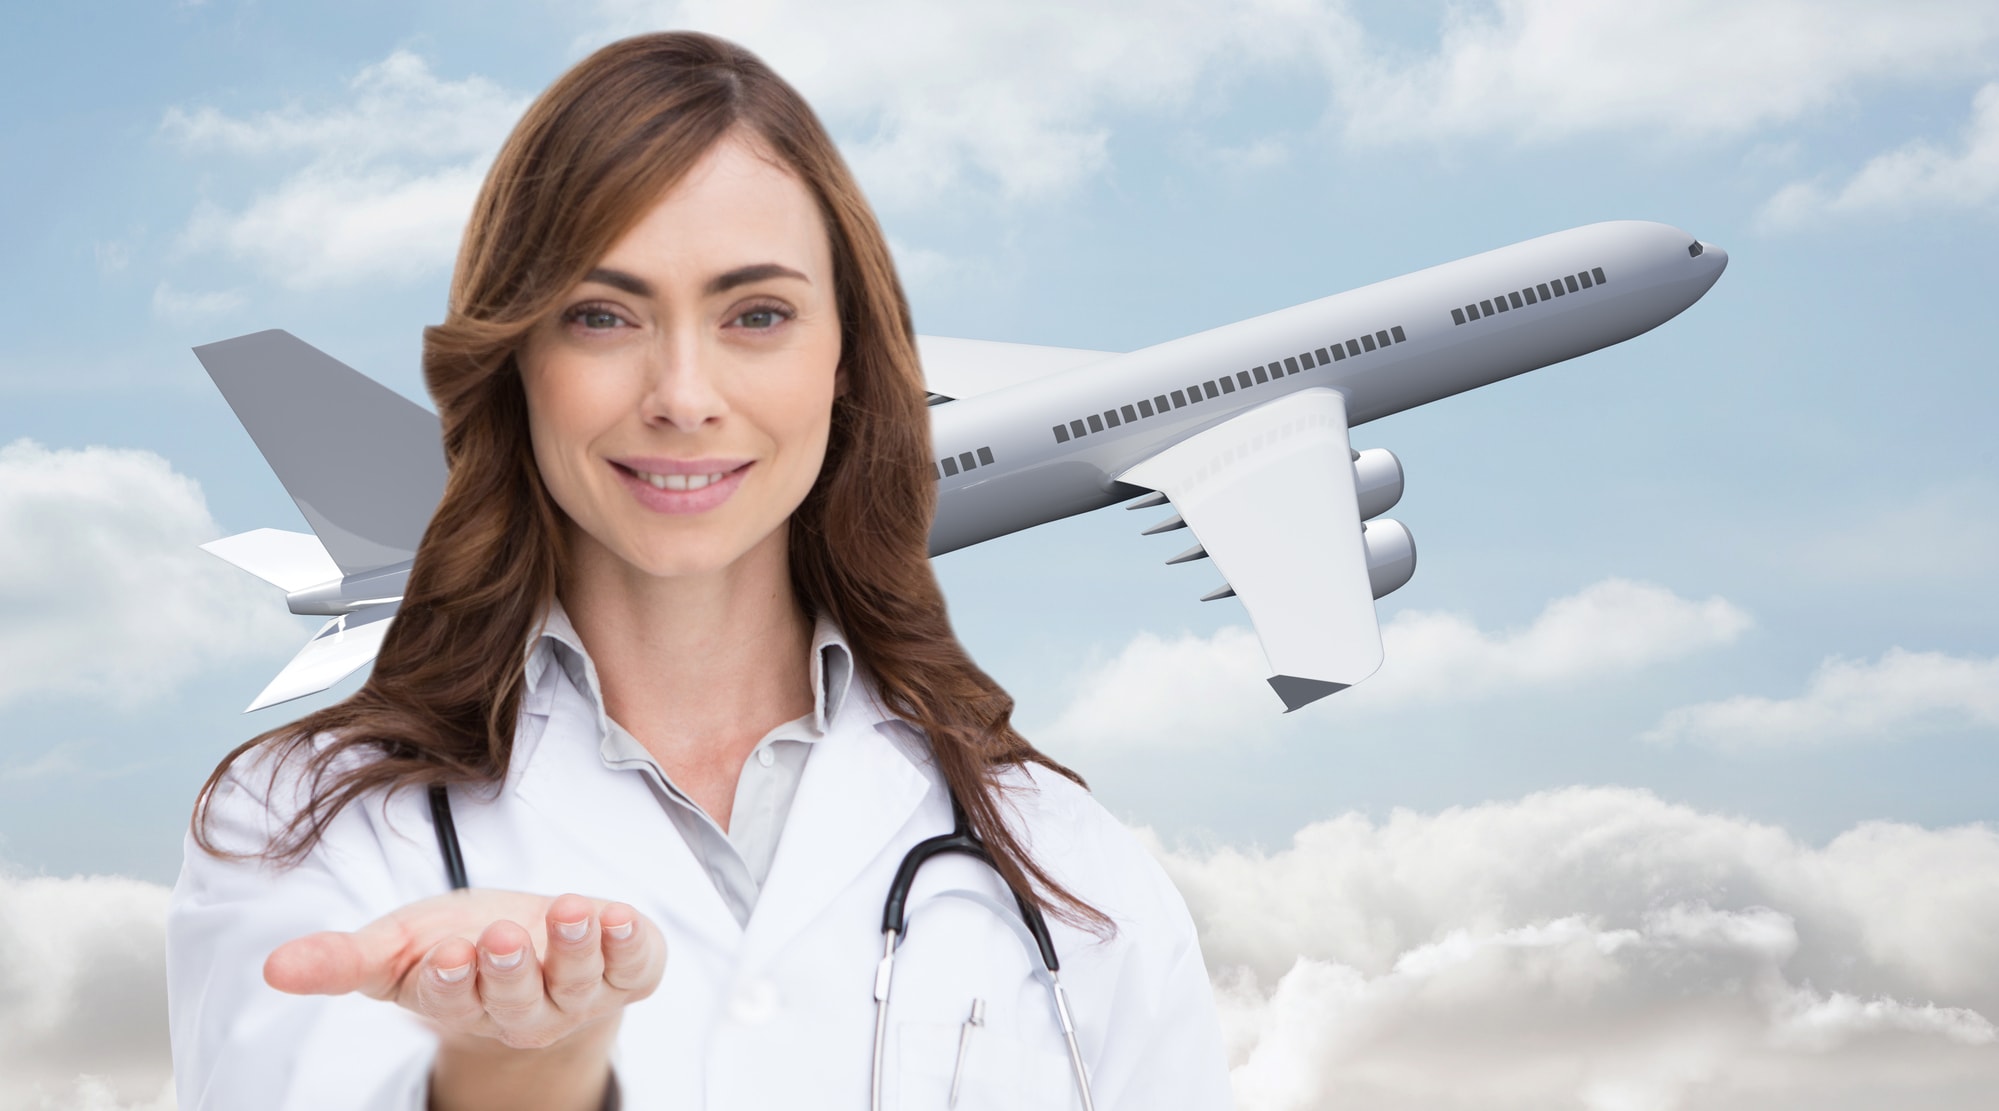 The possible risks of traveling abroad for medical tourism